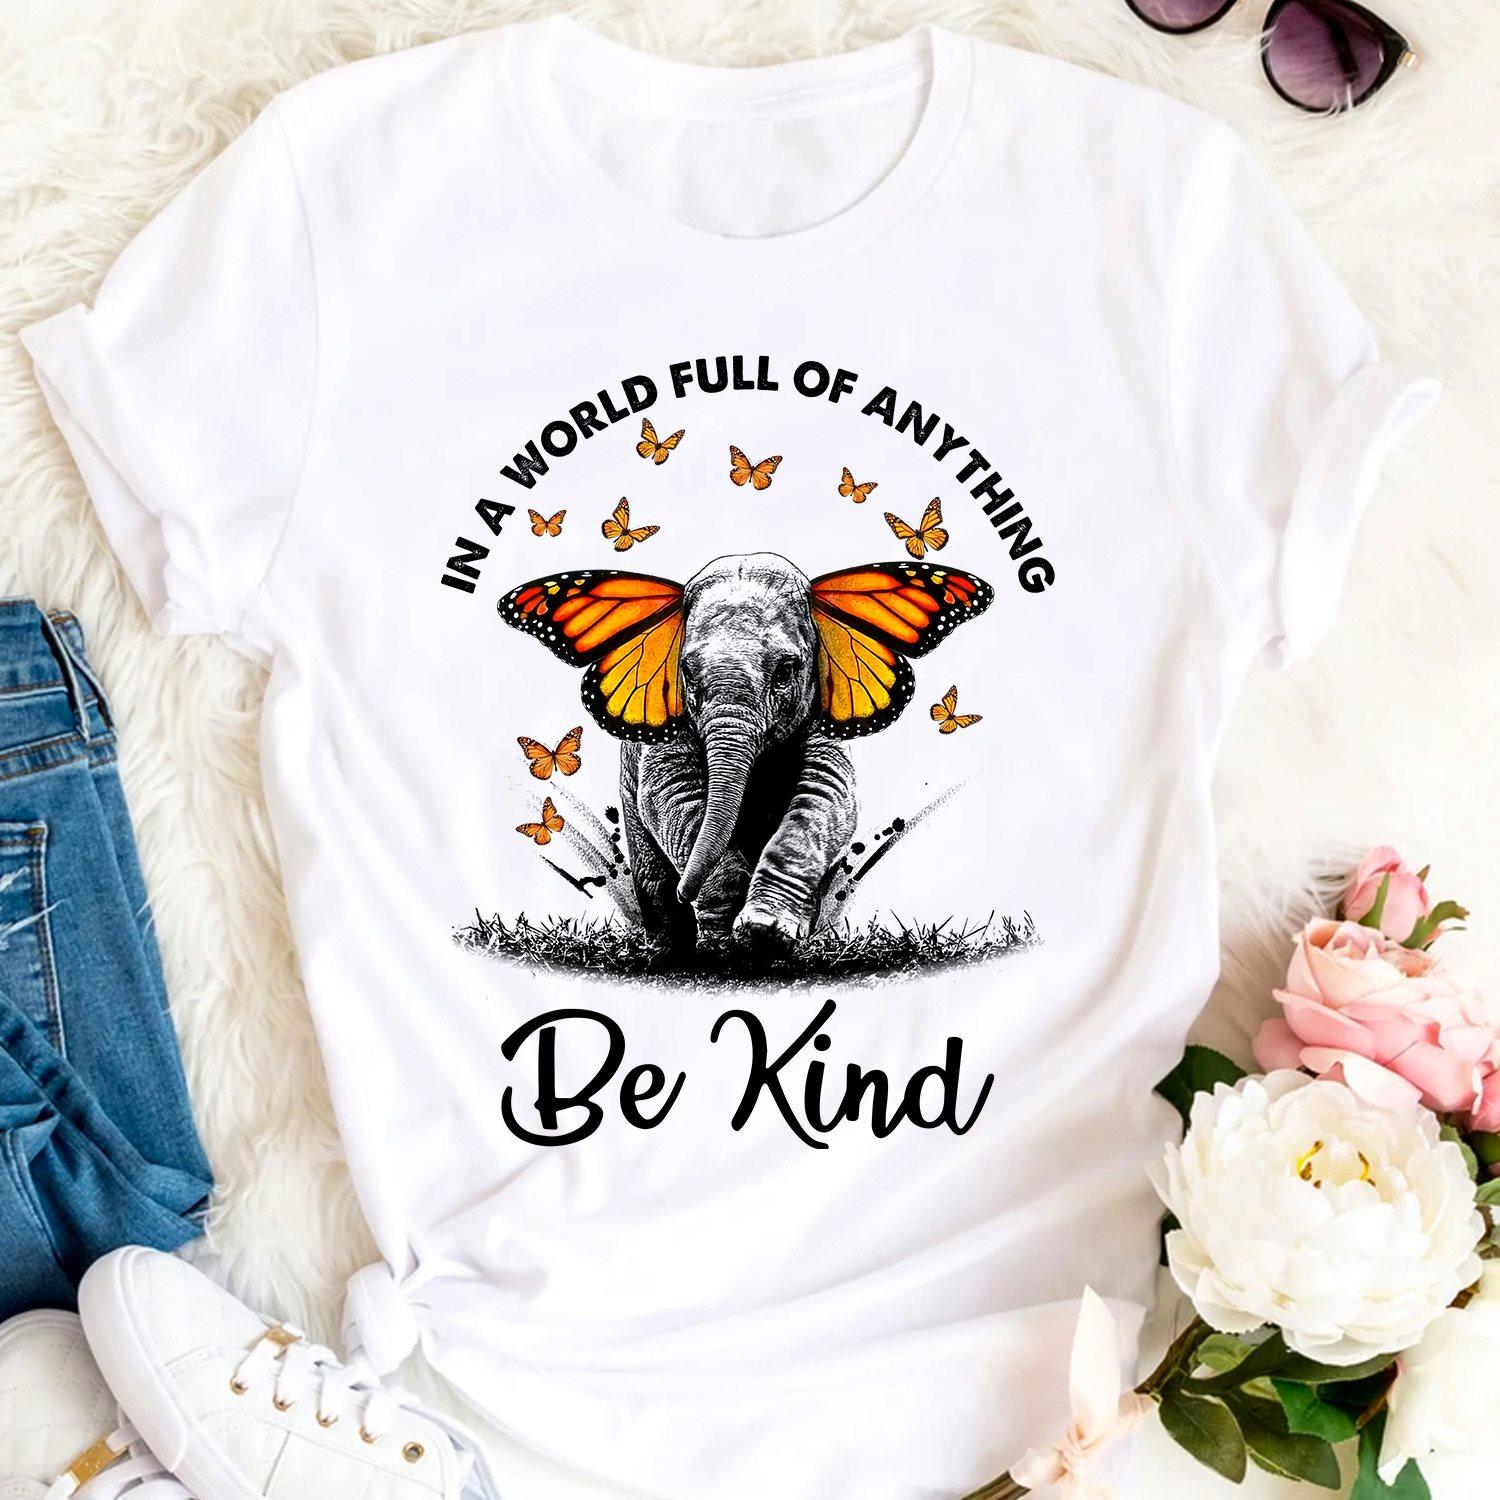 Elephant Butterfly - In a world full of anything be kind